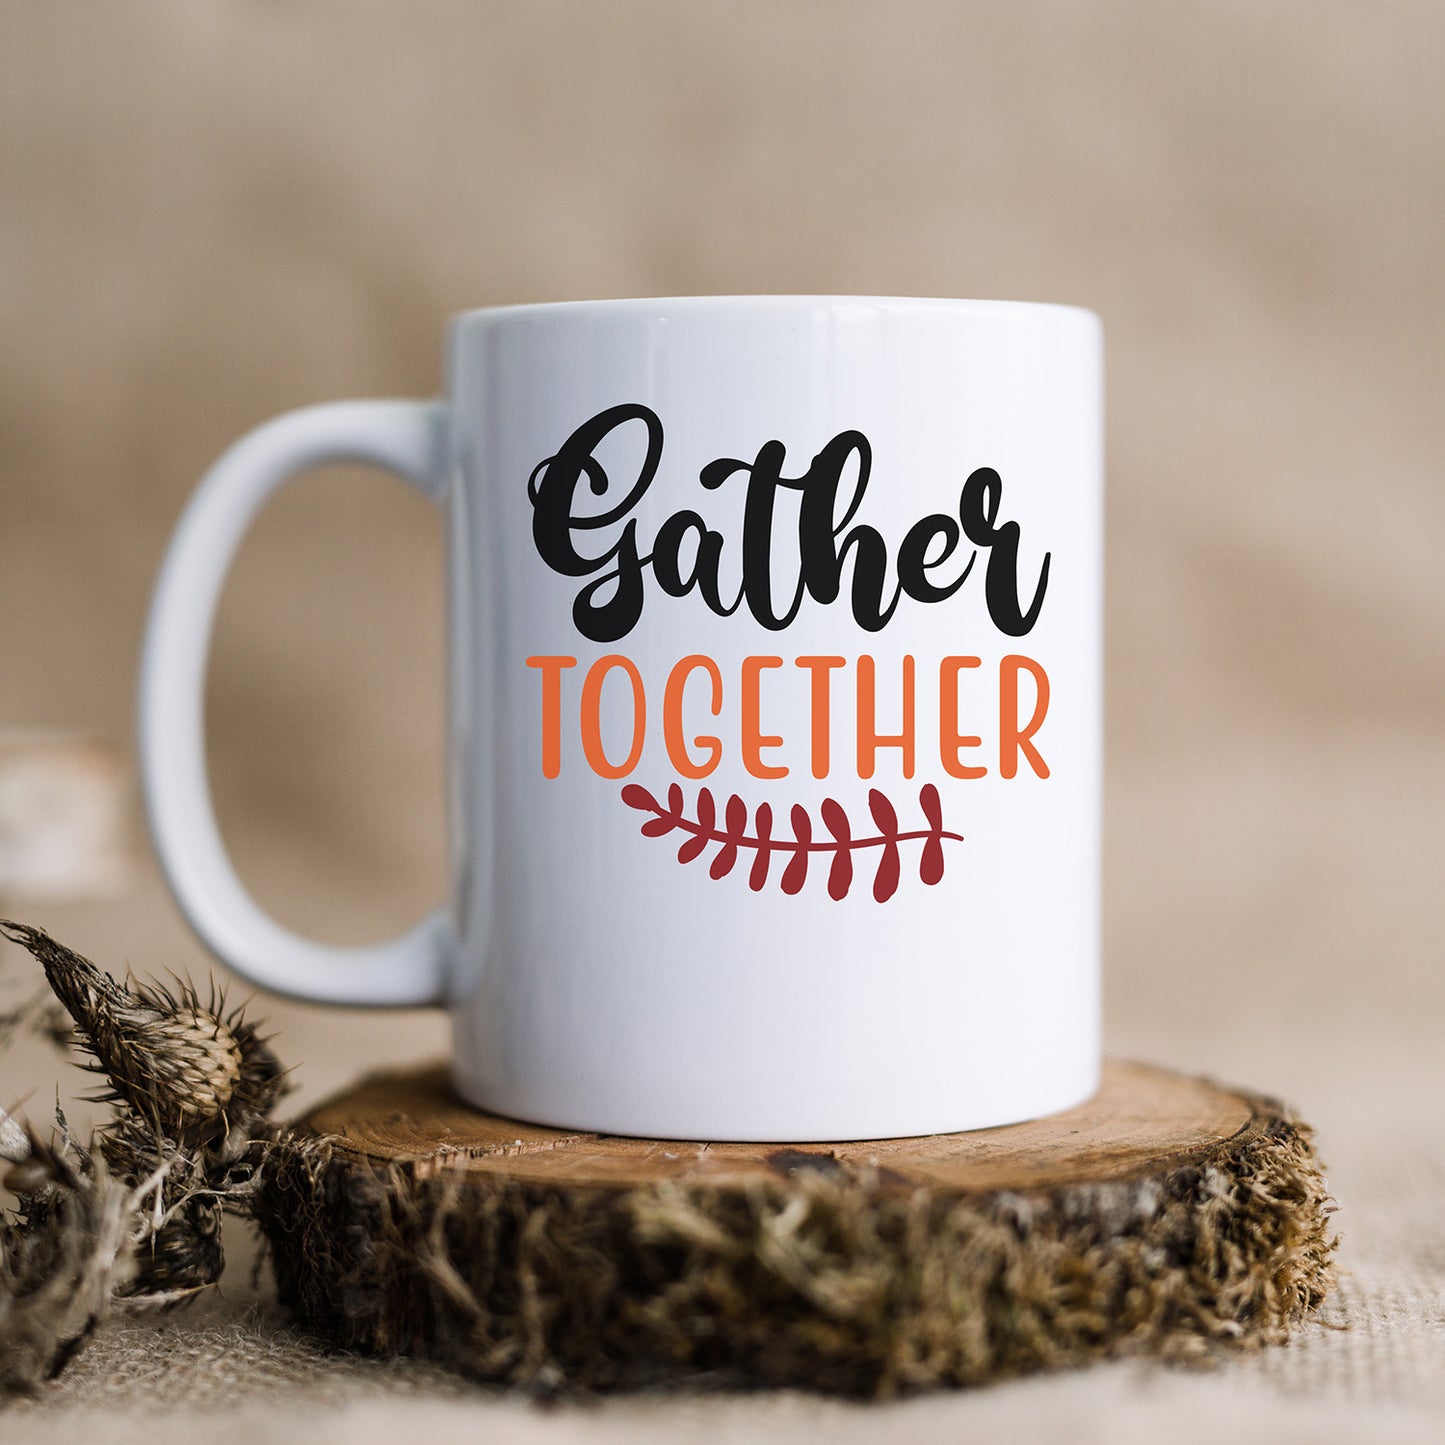 "Gather Together" Graphic